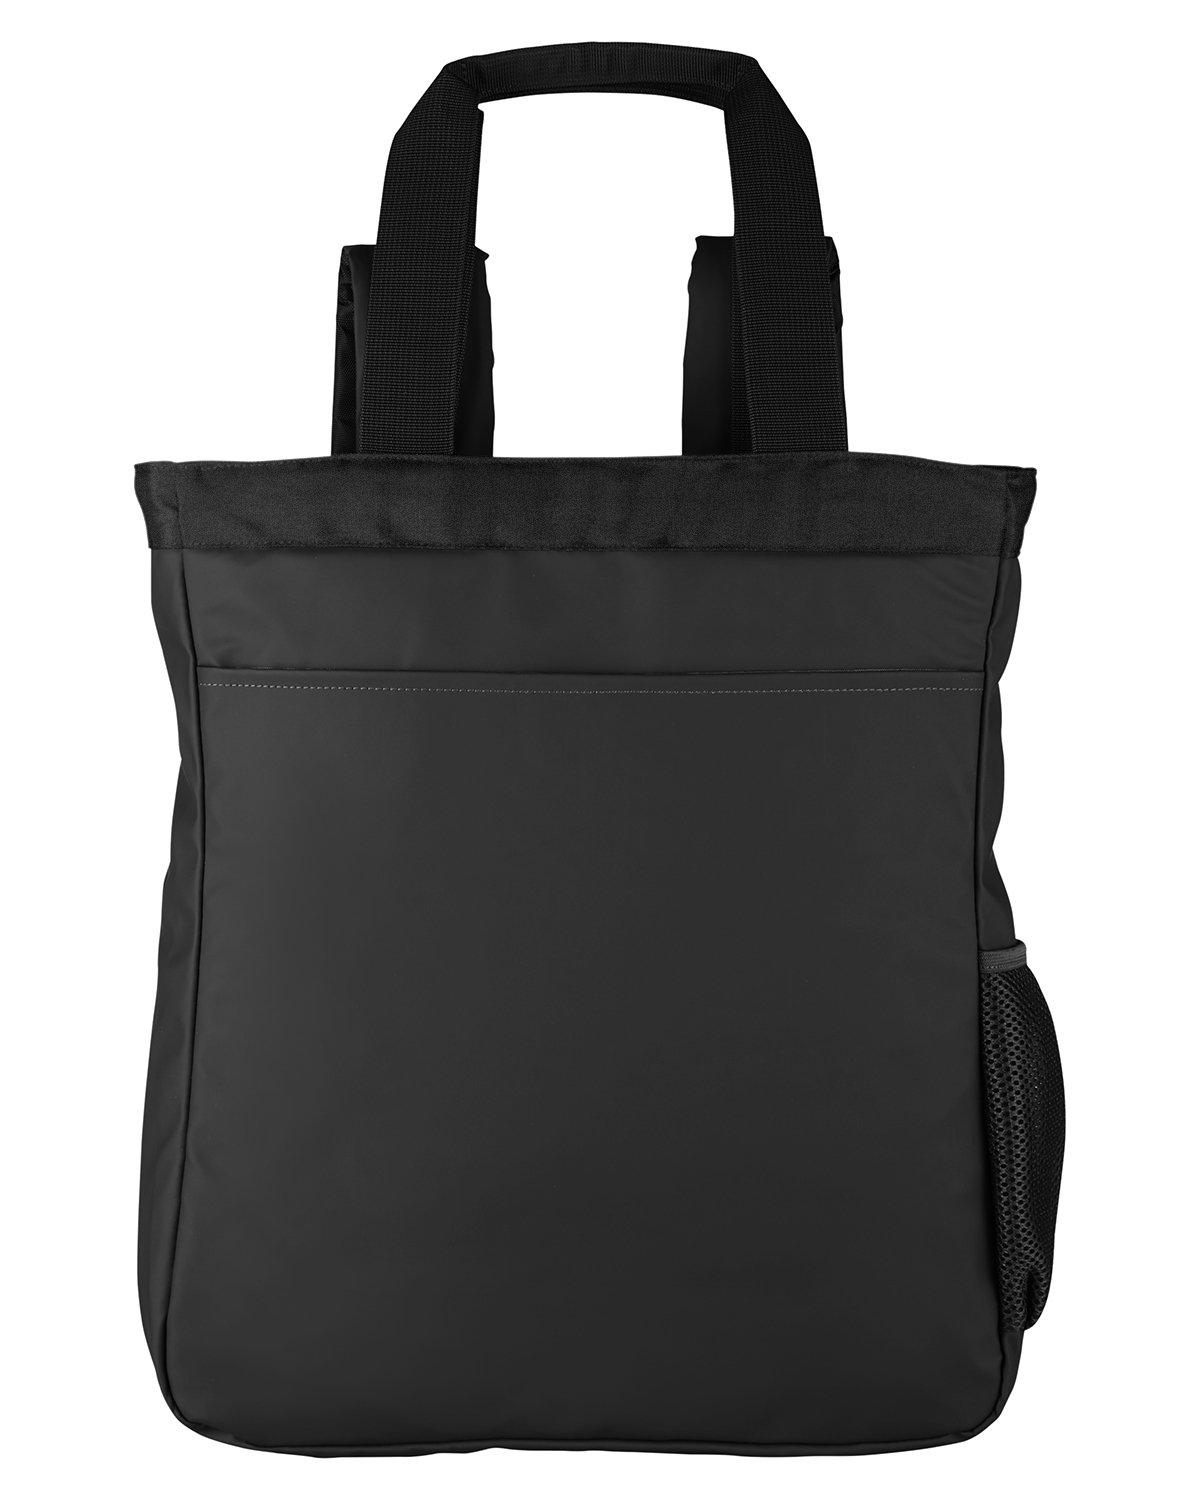 North End Men's Reflective Convertible Backpack Tote BLACK 